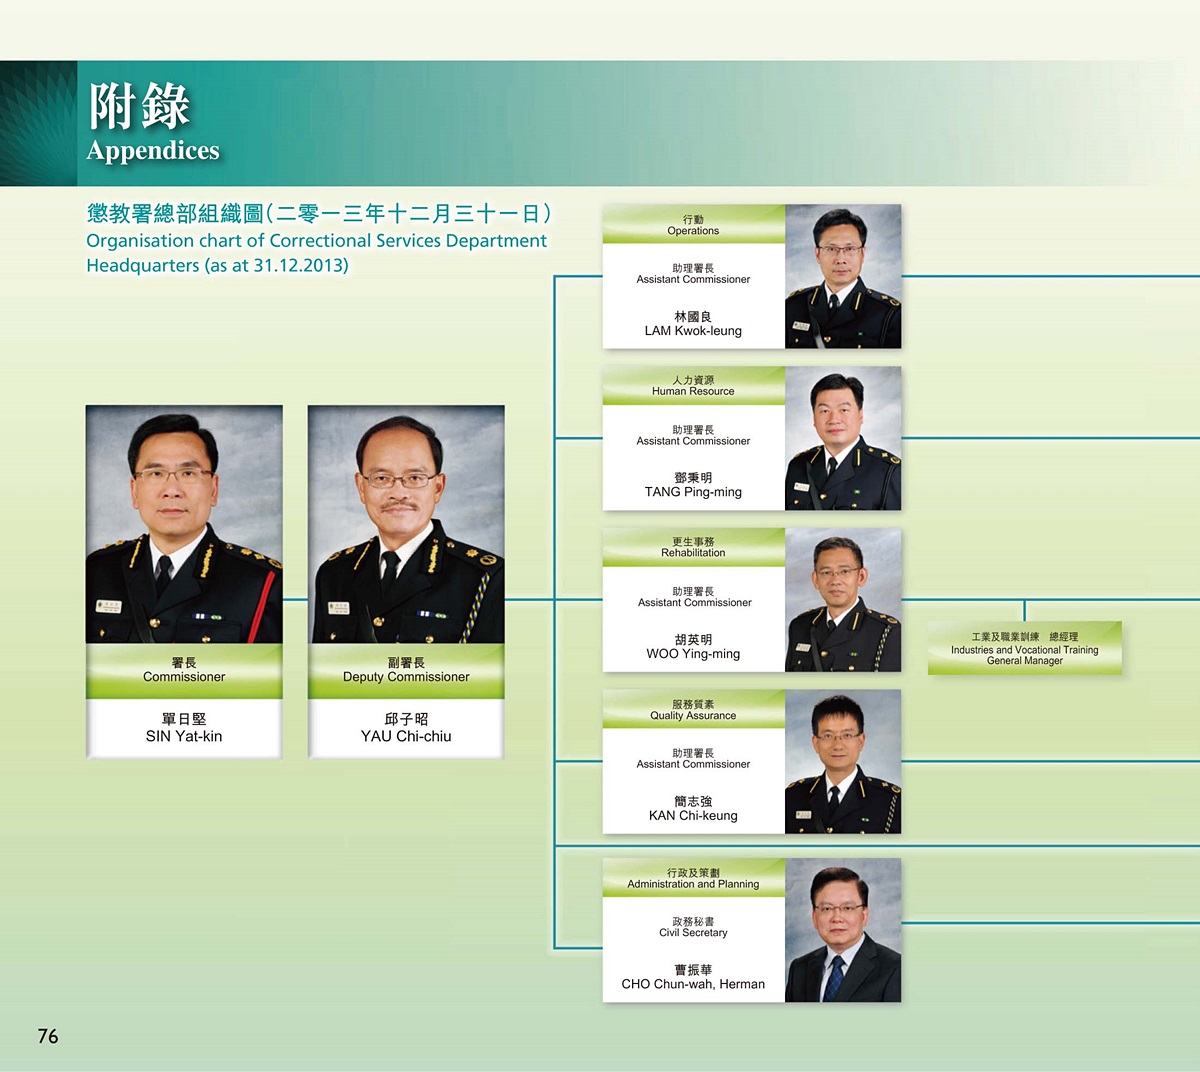 Organisation chart of Correctional Services Department Headquarters (as at 31.12.2013)